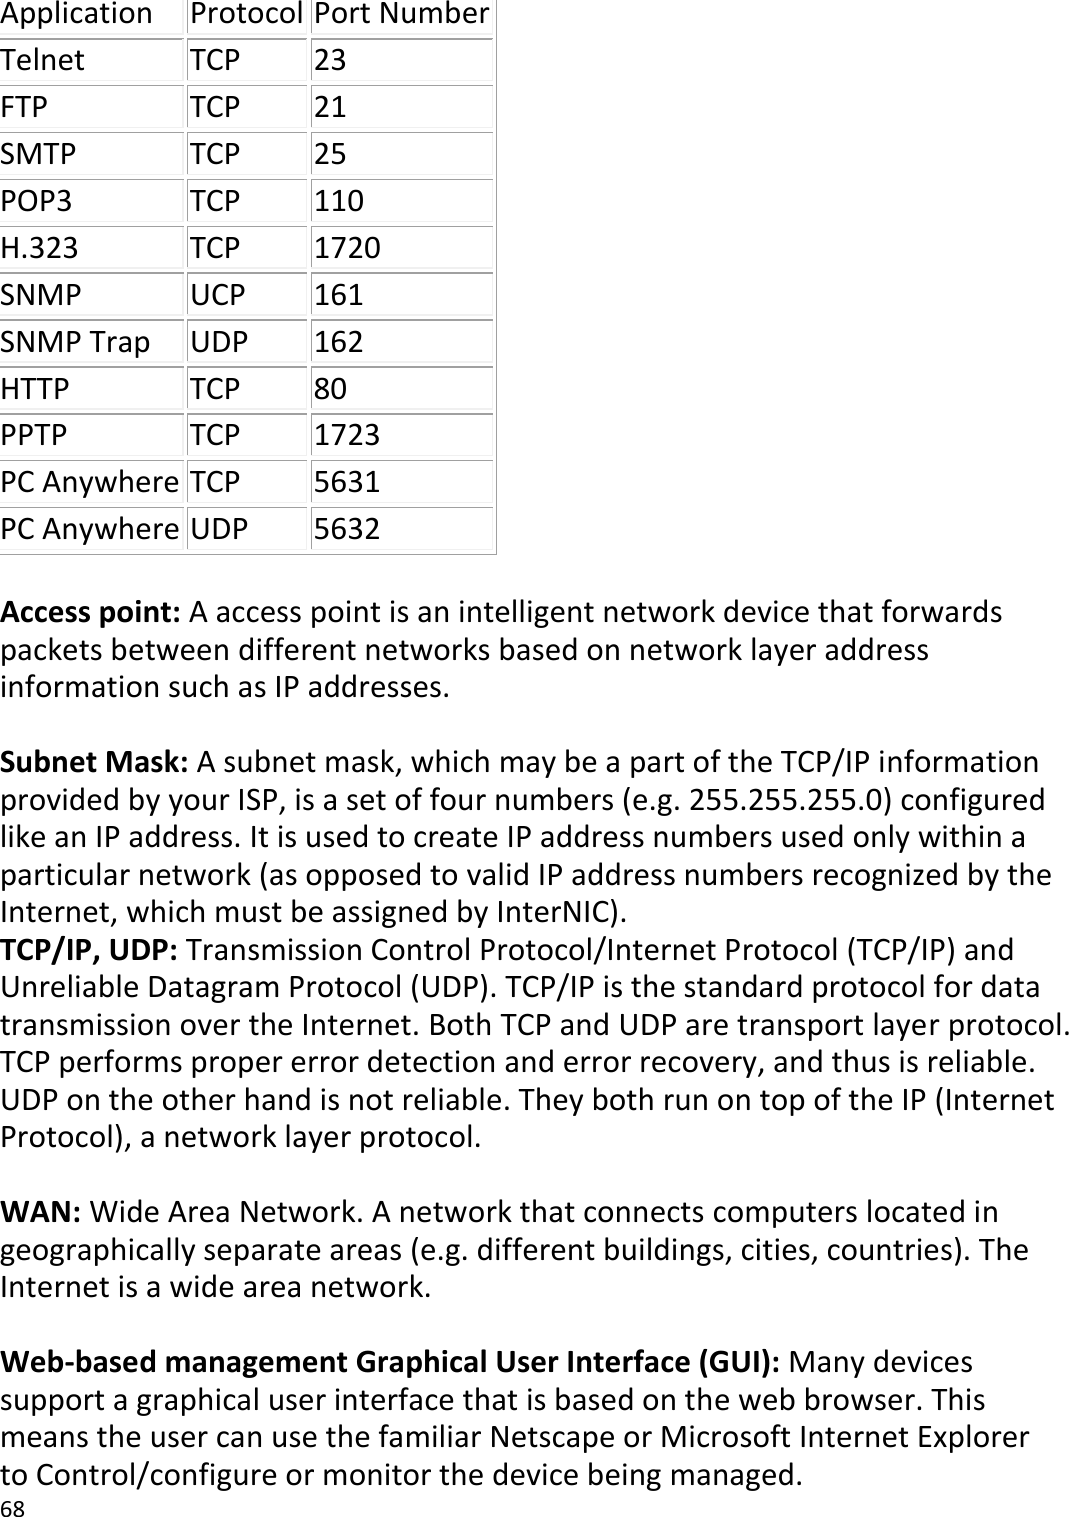 68   Application Protocol Port Number Telnet TCP 23 FTP TCP 21 SMTP TCP 25 POP3 TCP 110 H.323 TCP 1720 SNMP UCP 161 SNMP Trap UDP 162 HTTP TCP 80 PPTP TCP 1723 PC Anywhere TCP 5631 PC Anywhere UDP 5632  Access point: A access point is an intelligent network device that forwards packets between different networks based on network layer address information such as IP addresses.  Subnet Mask: A subnet mask, which may be a part of the TCP/IP information provided by your ISP, is a set of four numbers (e.g. 255.255.255.0) configured like an IP address. It is used to create IP address numbers used only within a particular network (as opposed to valid IP address numbers recognized by the Internet, which must be assigned by InterNIC).   TCP/IP, UDP: Transmission Control Protocol/Internet Protocol (TCP/IP) and Unreliable Datagram Protocol (UDP). TCP/IP is the standard protocol for data transmission over the Internet. Both TCP and UDP are transport layer protocol. TCP performs proper error detection and error recovery, and thus is reliable. UDP on the other hand is not reliable. They both run on top of the IP (Internet Protocol), a network layer protocol.  WAN: Wide Area Network. A network that connects computers located in geographically separate areas (e.g. different buildings, cities, countries). The Internet is a wide area network.  Web-based management Graphical User Interface (GUI): Many devices support a graphical user interface that is based on the web browser. This means the user can use the familiar Netscape or Microsoft Internet Explorer to Control/configure or monitor the device being managed. 